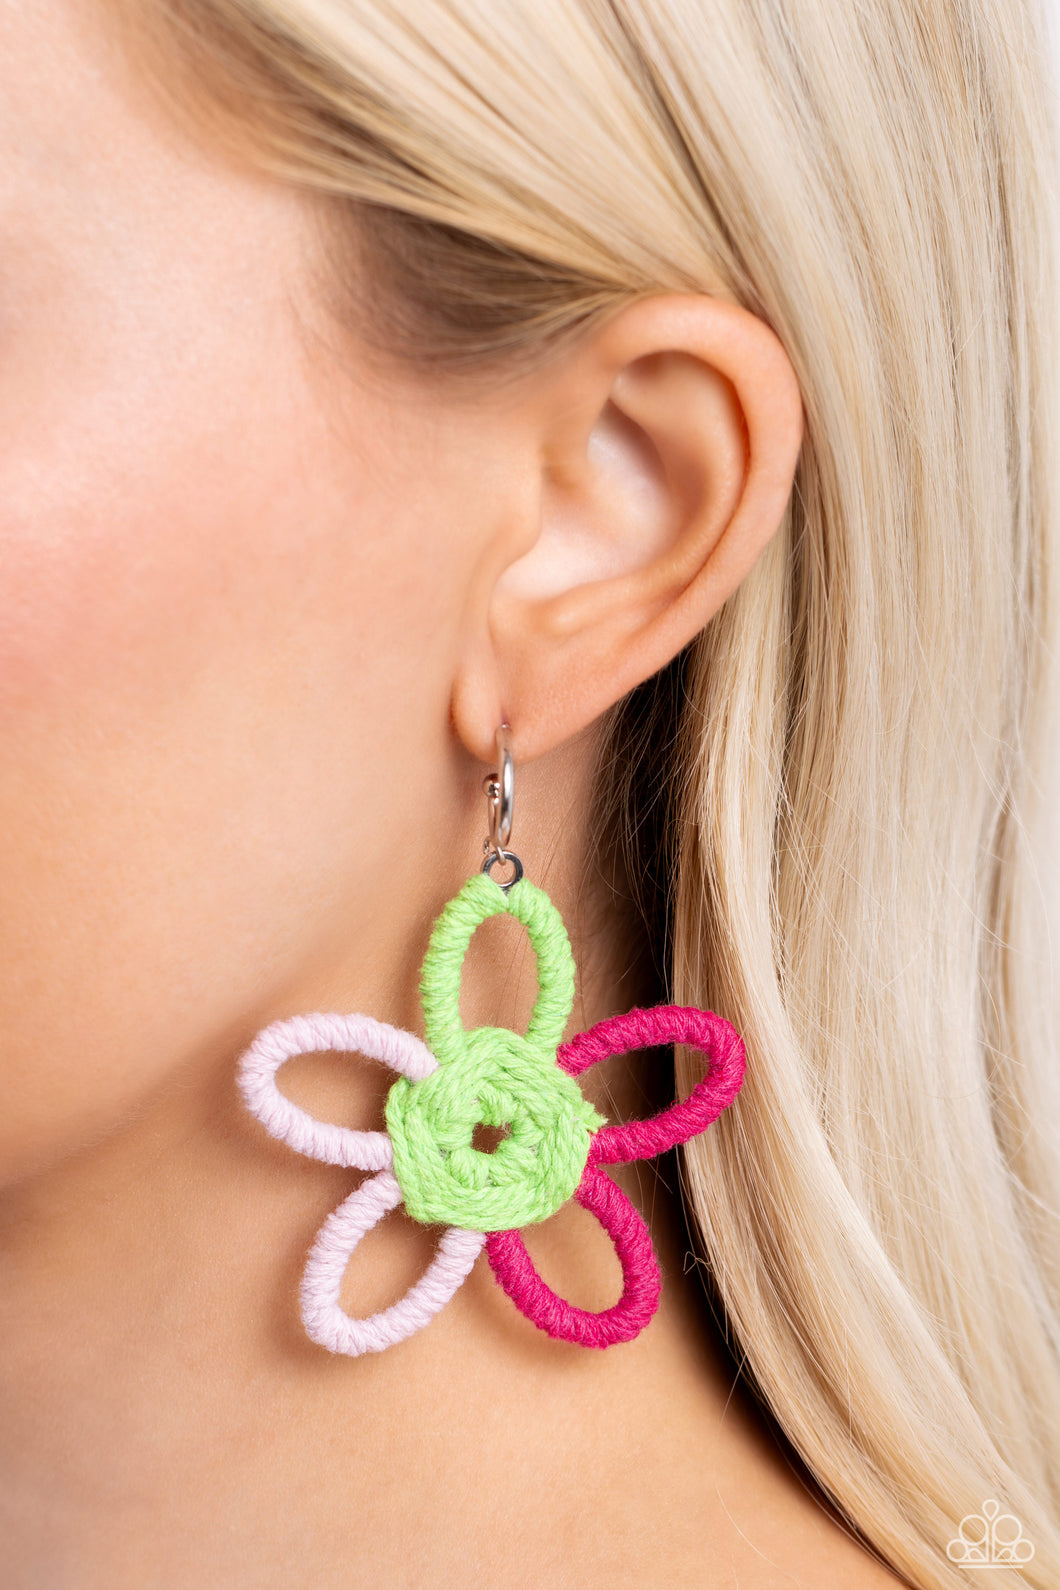 Featuring Kohlrabi, light pink, and Pink Peacock yarn, an oversized flower swings freely from a dainty silver hoop, creating a playful lure. Earring attaches to a standard post fitting. Hoop measures approximately 1/2